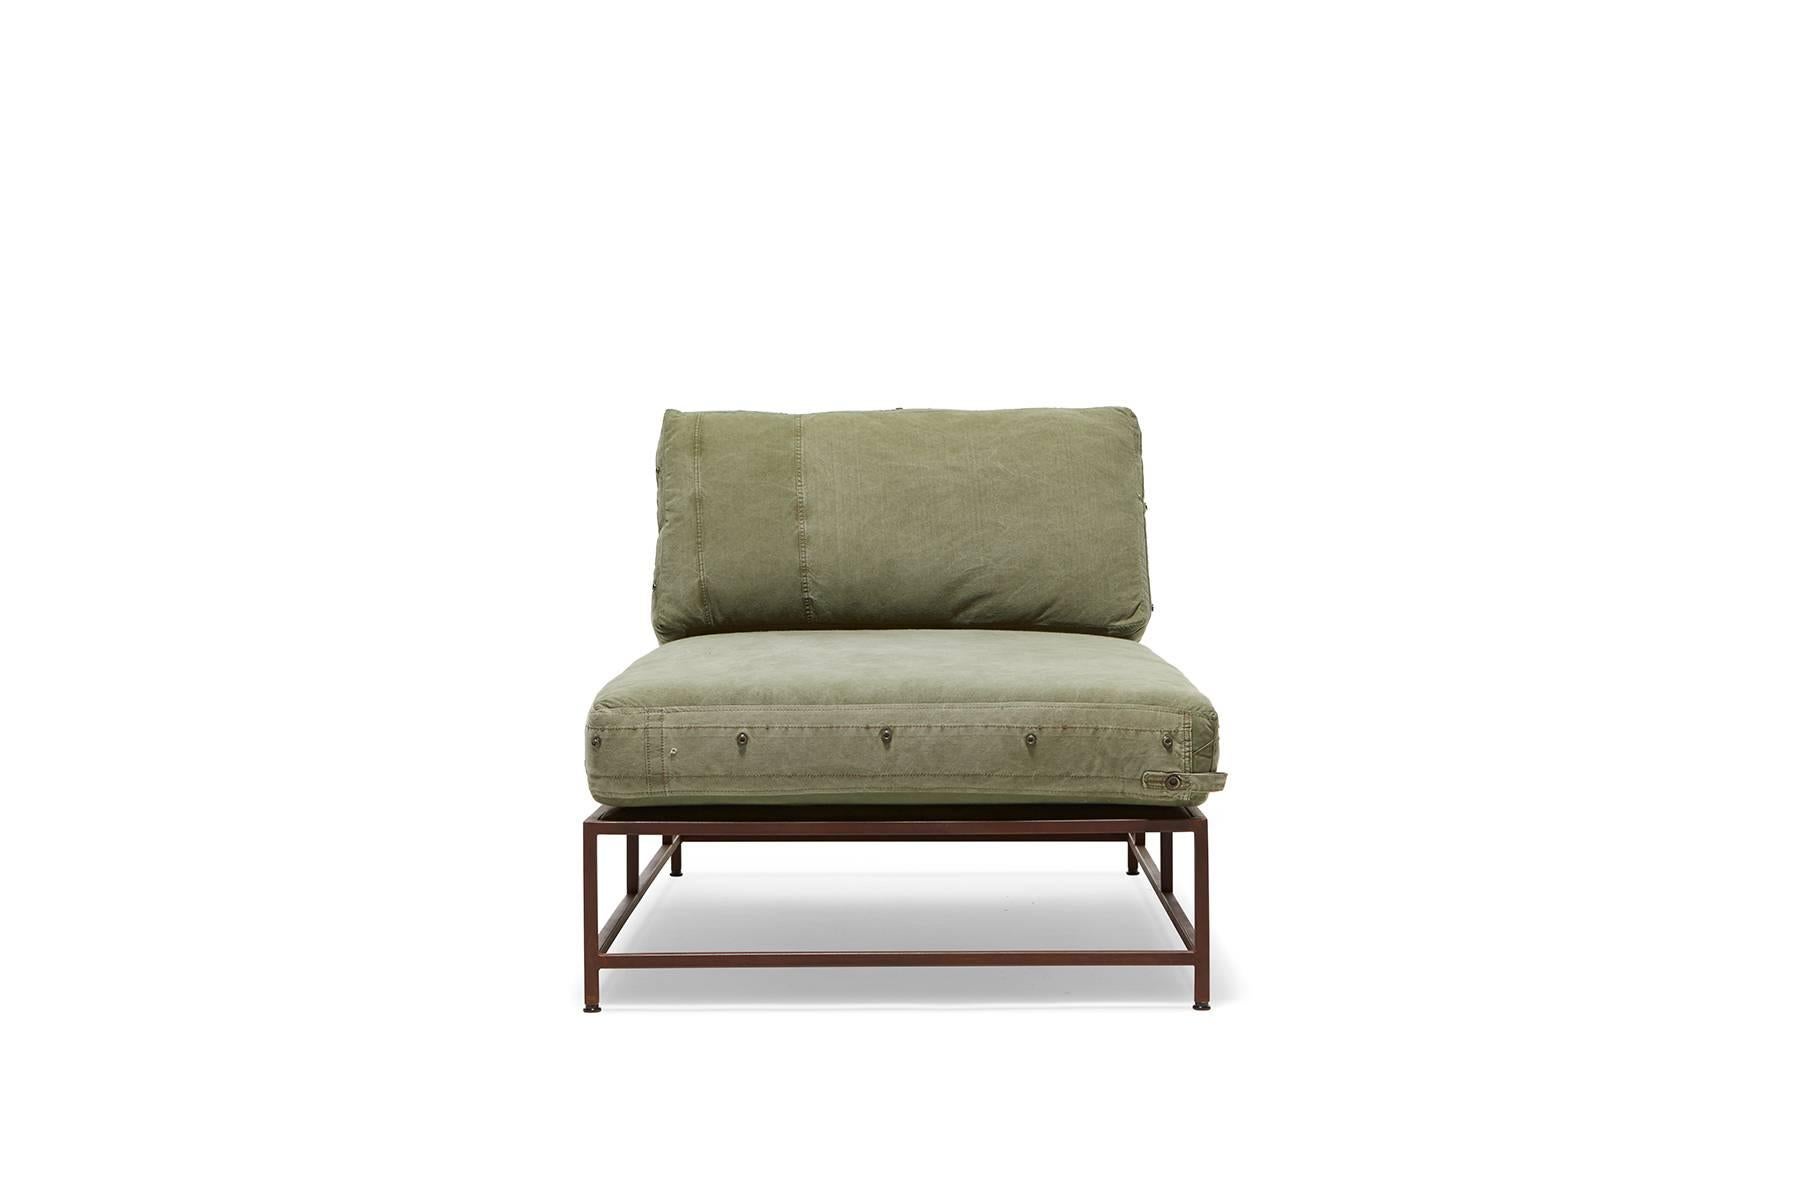 Part of the original Inheritance collection, the Chaise Lounge is a great standalone piece or as part of a modular sectional.  It is ideal for stretching out and lounging with its generous seat length.

Since first designing Inheritance Collection,